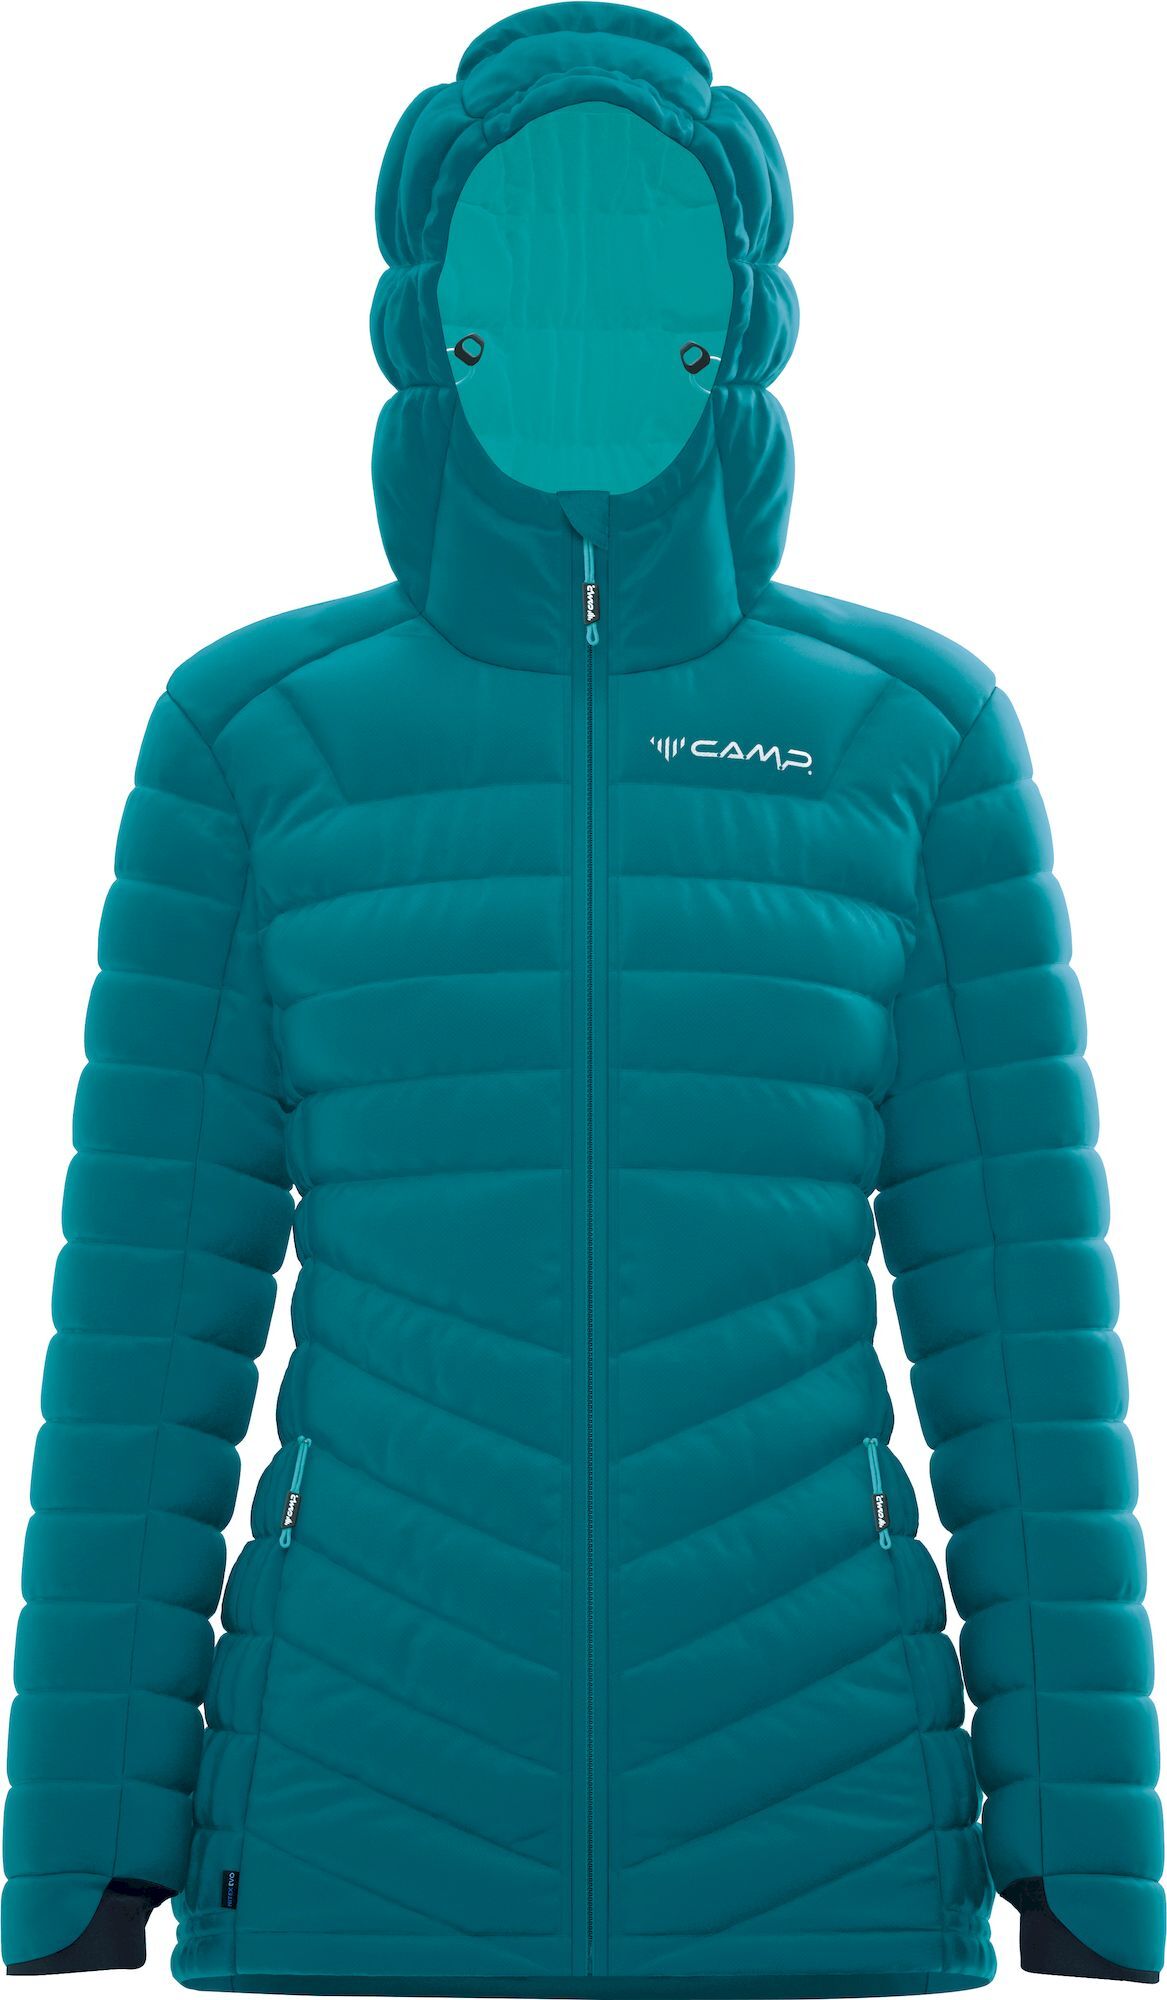 Camp Protection Jacket Lady - Down jacket - Women's